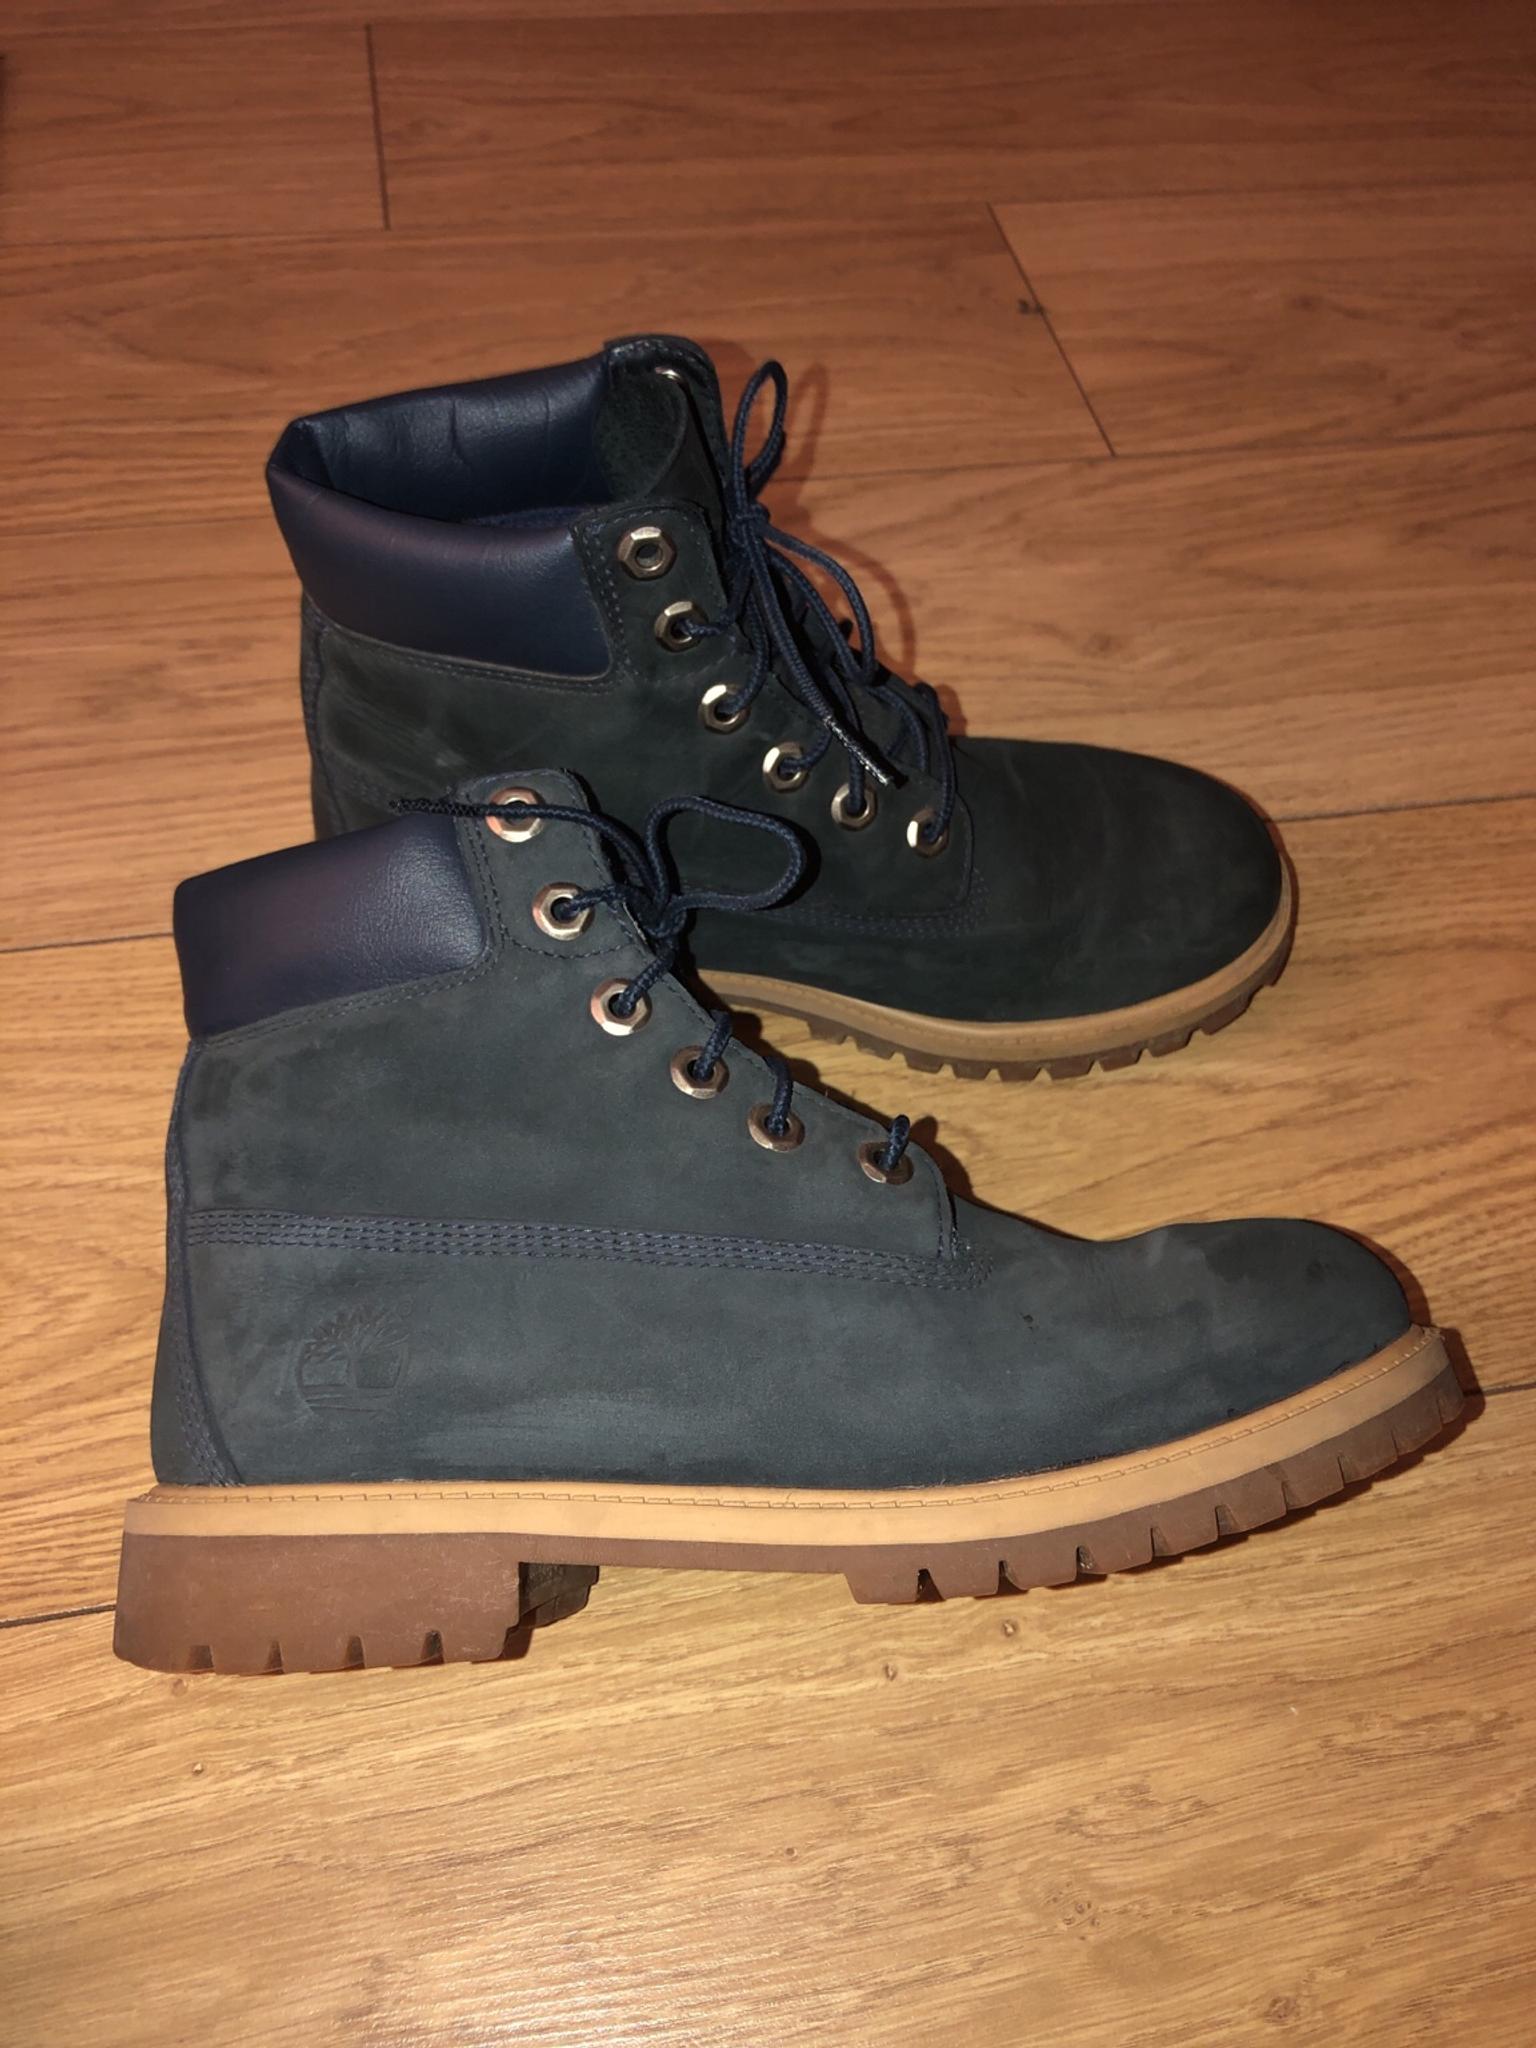 Timberland size 5.5 in BL1 Bolton for 